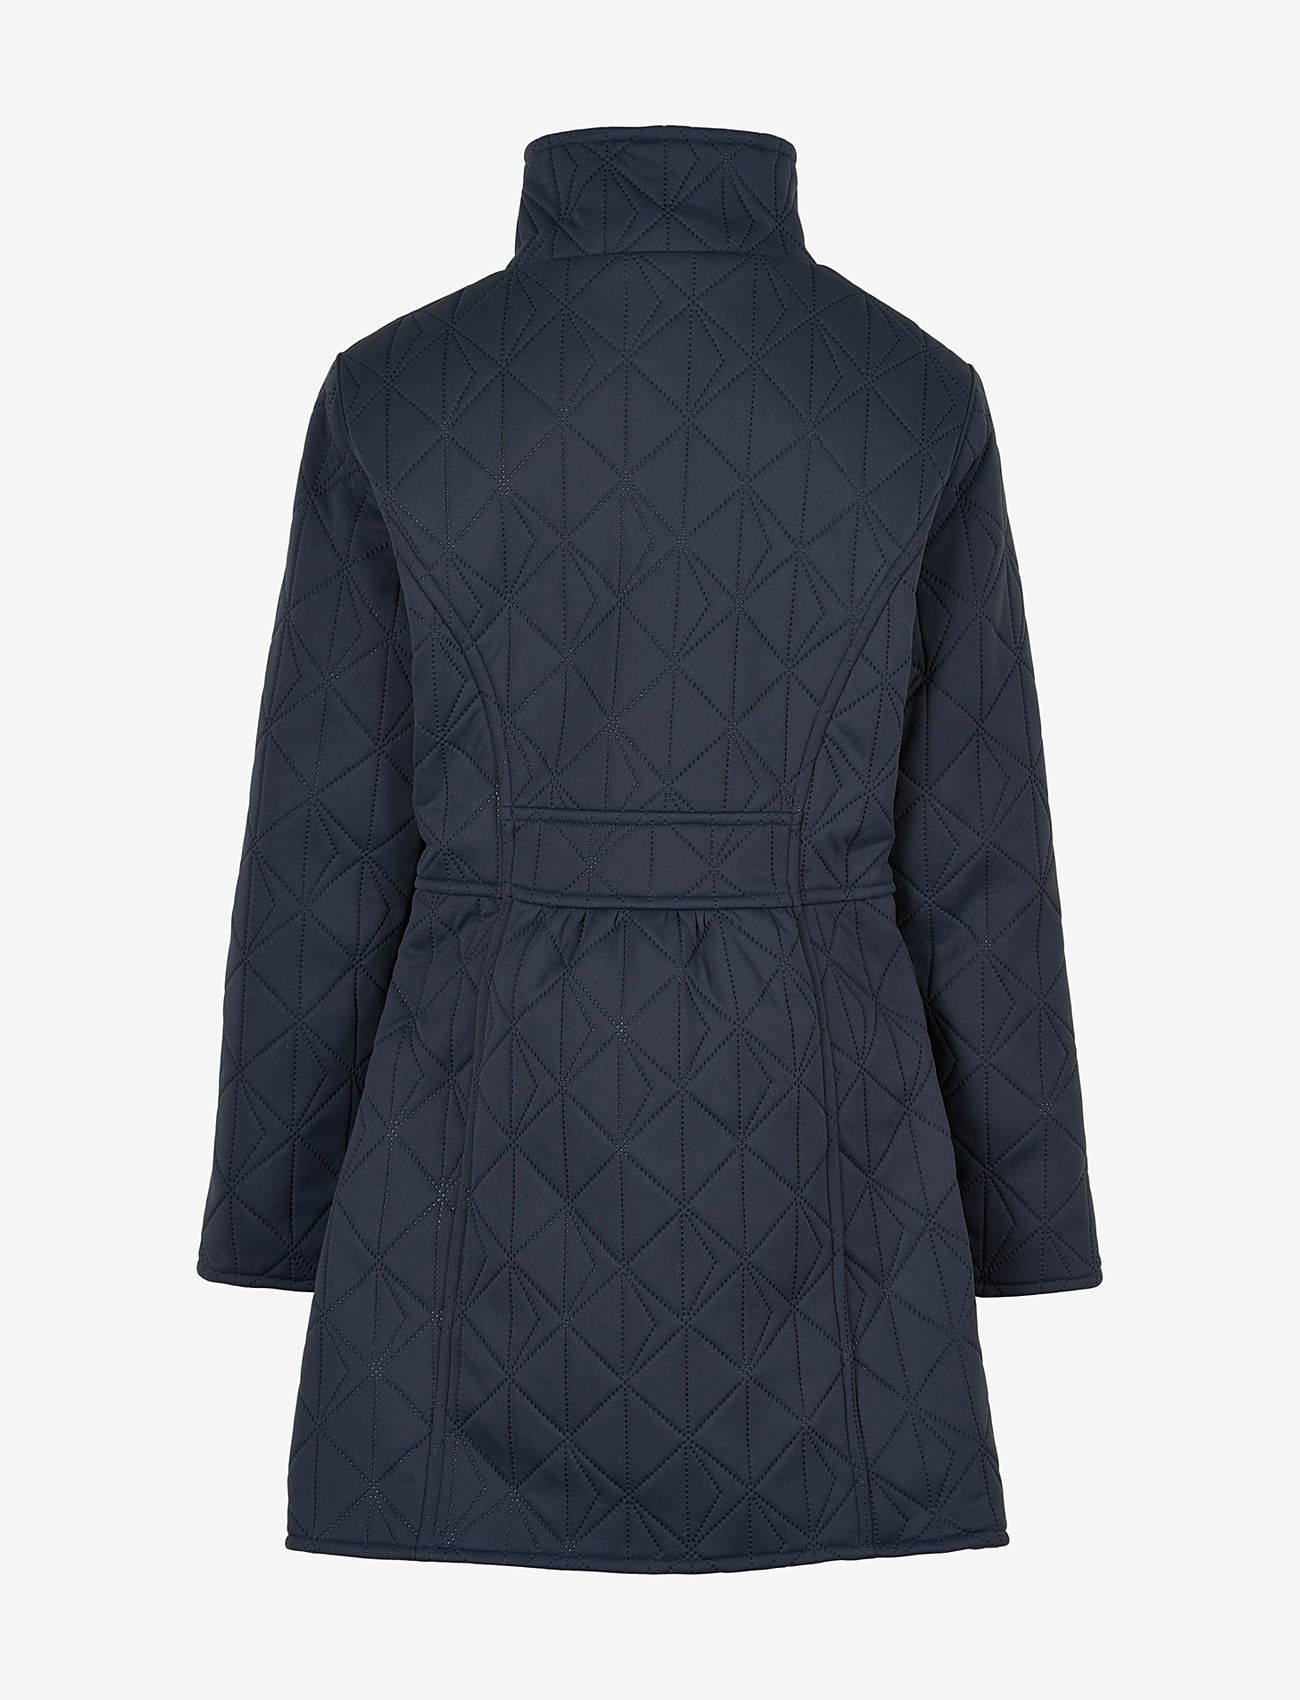 By Lindgren - Sigrid Thermo Jacket - midnight ink - 1